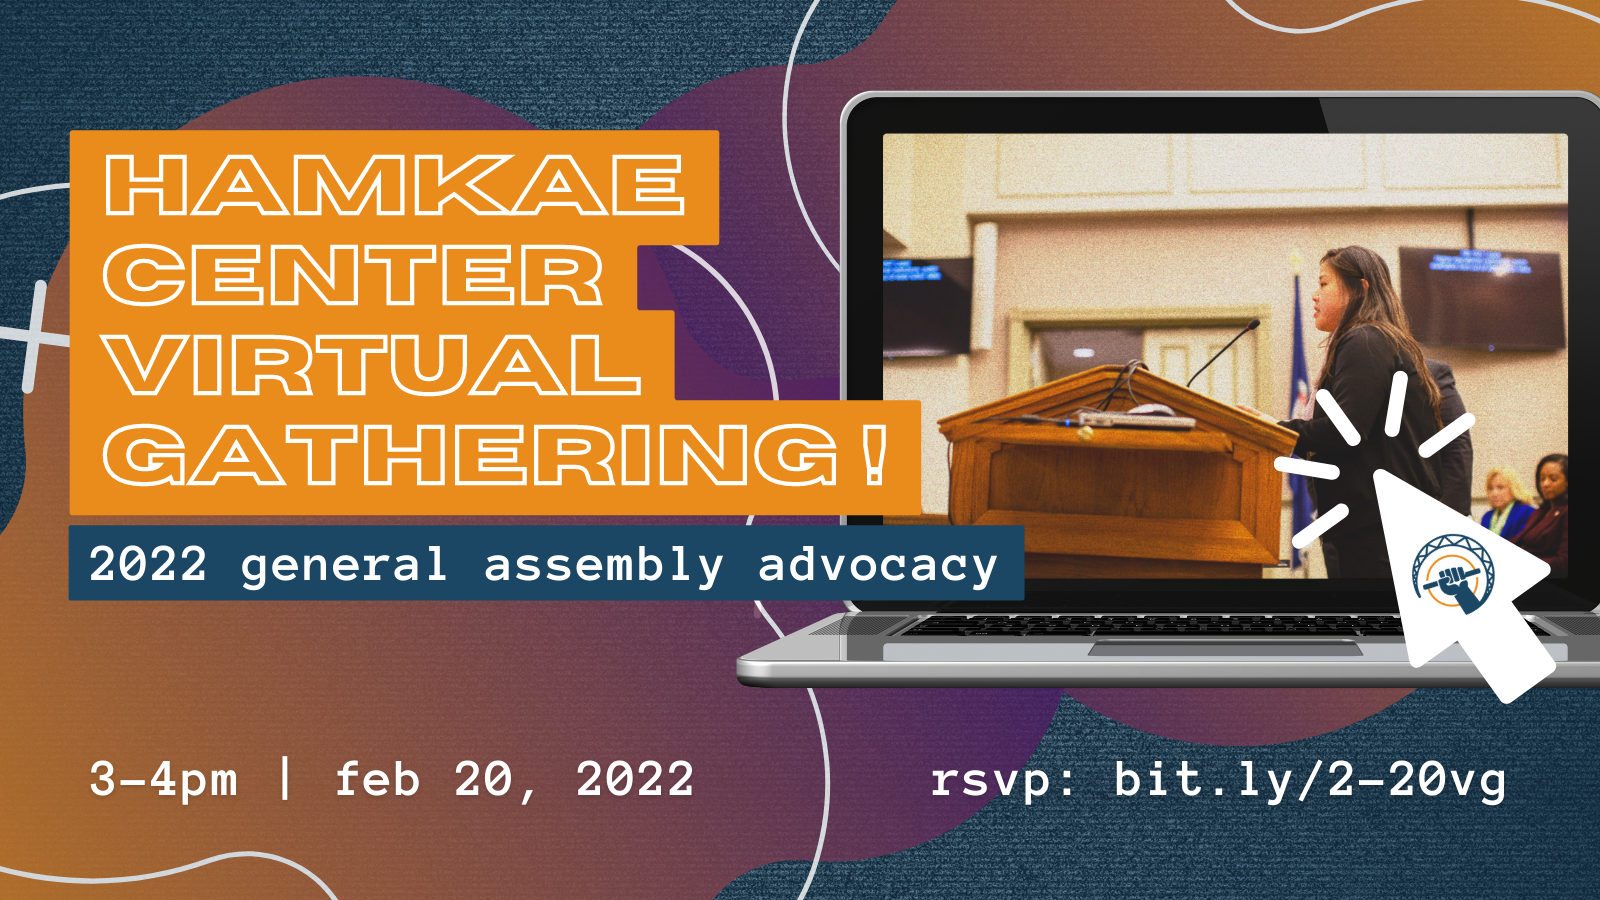 Graphic of a large mouse pointer clicking on a laptop that has a picture of a woman testifying in front of legislators. Text says: Hamkae Center Virtual Gathering! 2022 General Assembly Advocacy. 3-4pm Feb 20, 2022. RSVP: bit.ly/2-20vg